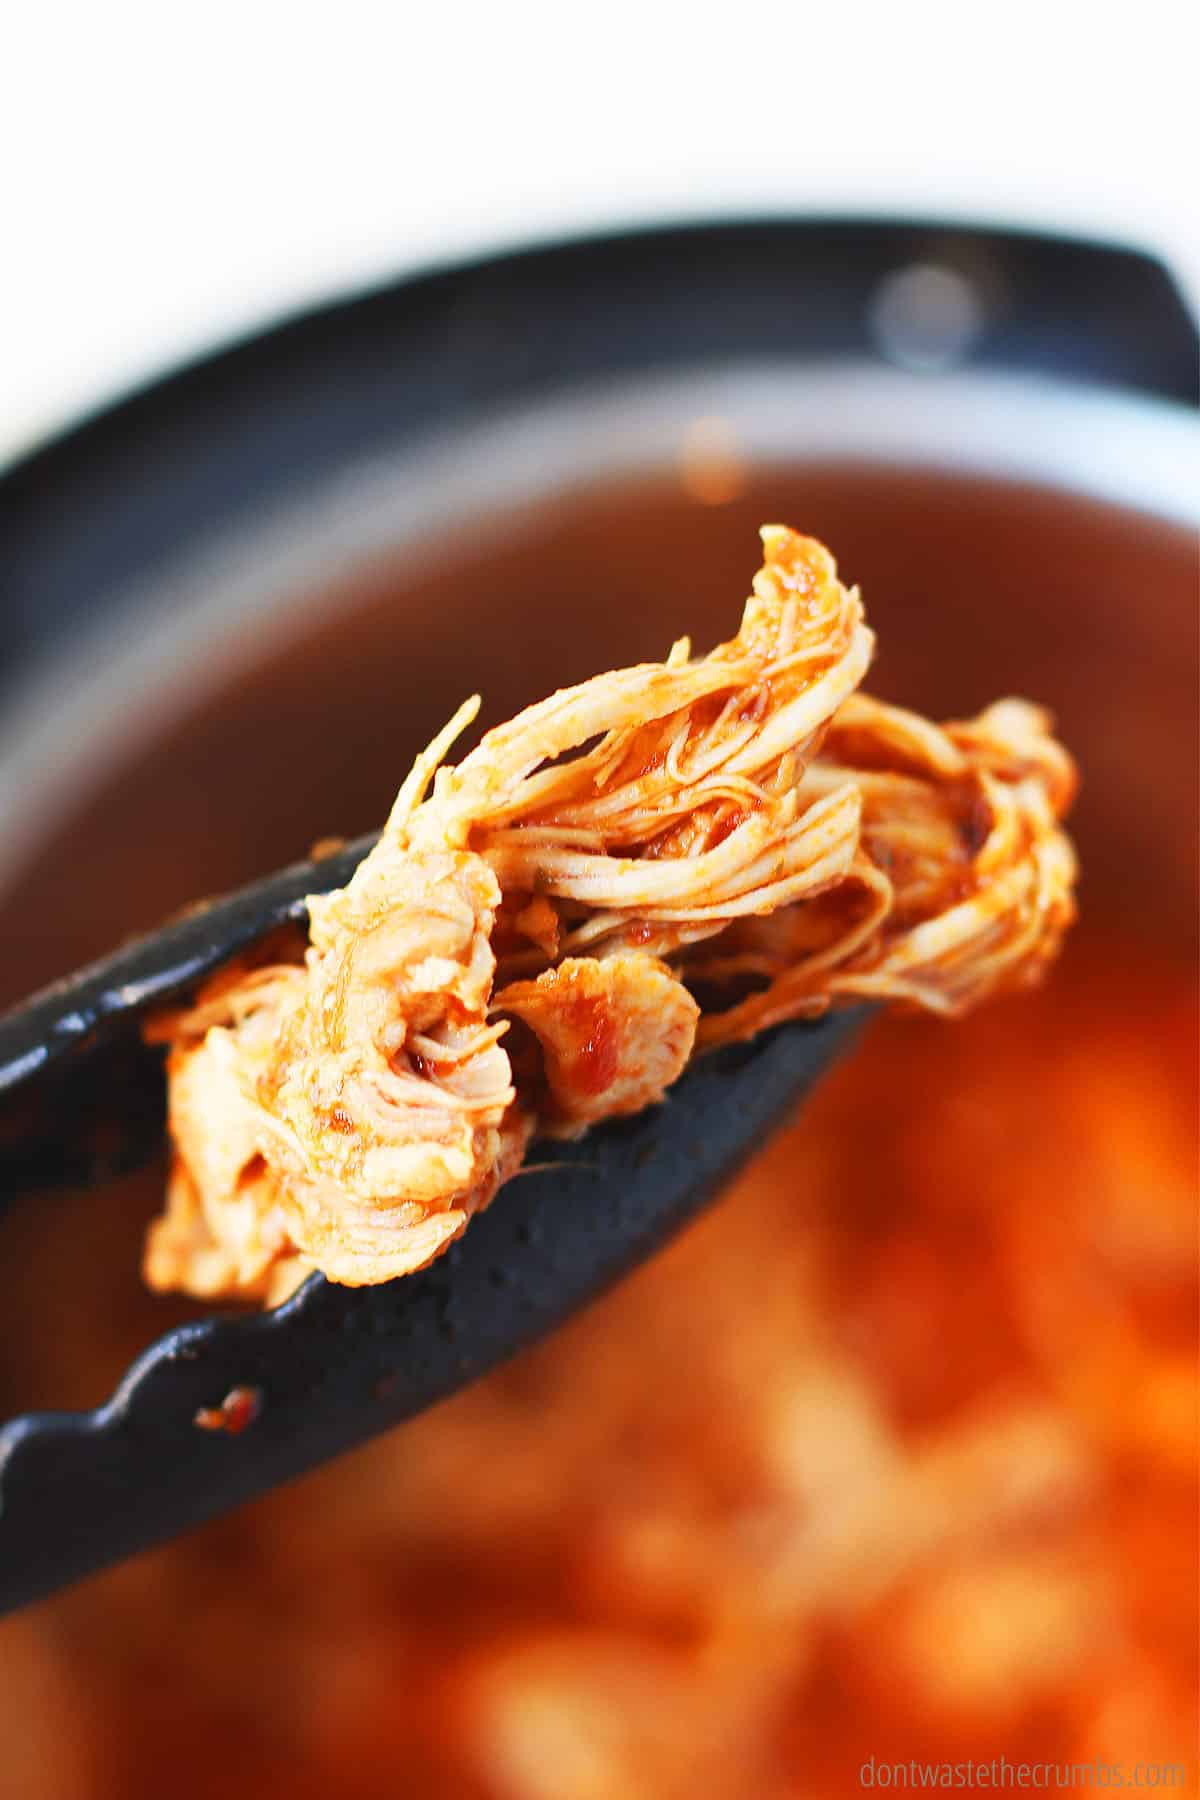 A pair of tongs holding up a piece of cooked chicken tinga with the red adobo sauce in the background.